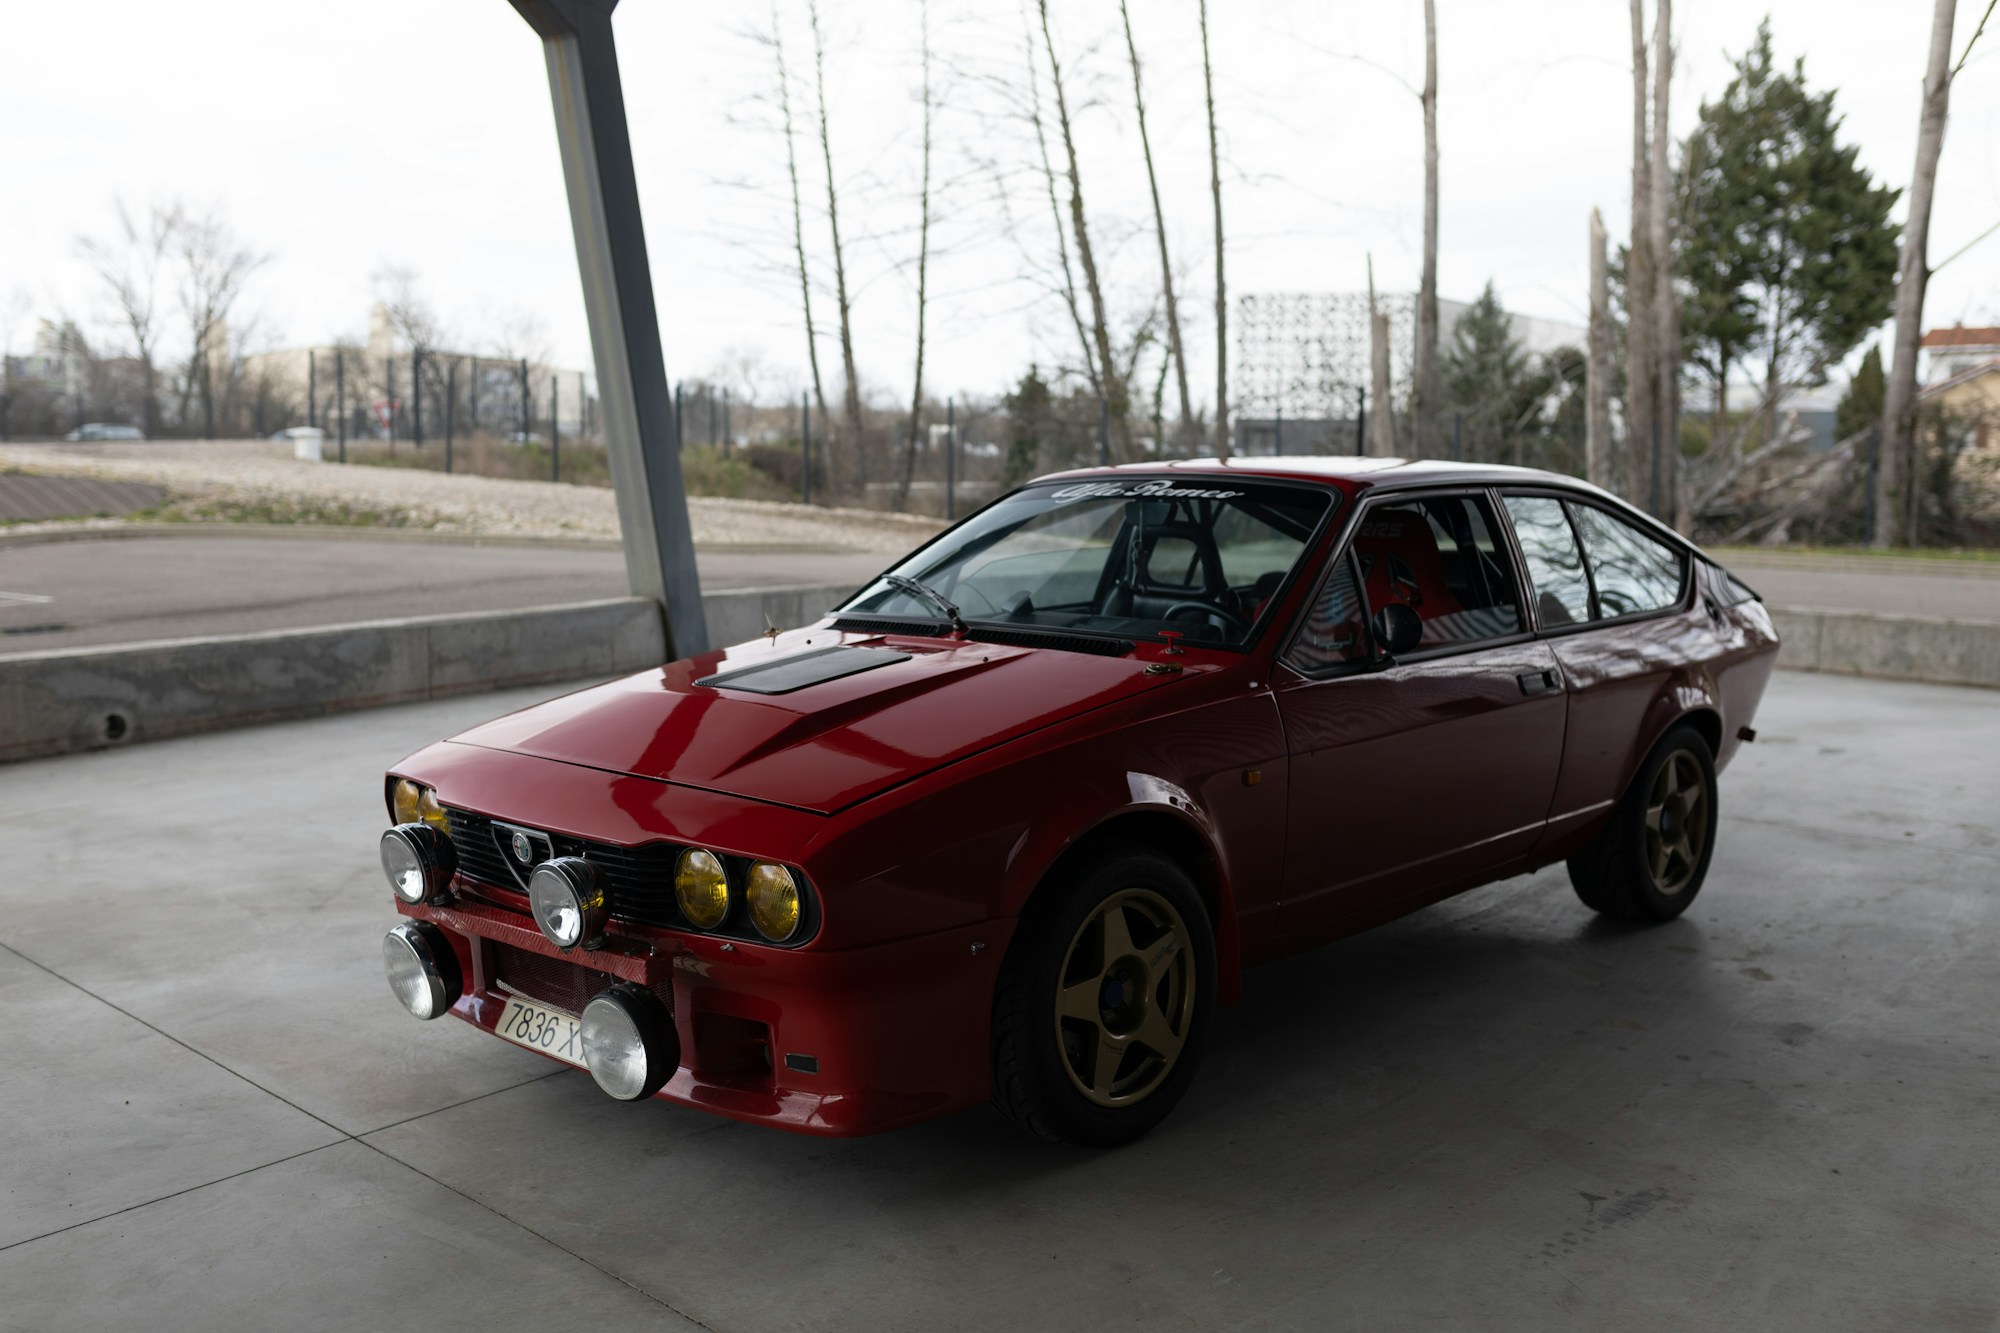 1981 Alfa Romeo Gtv6 - Group 4 Rally Car For Sale By Auction In Paris,  France